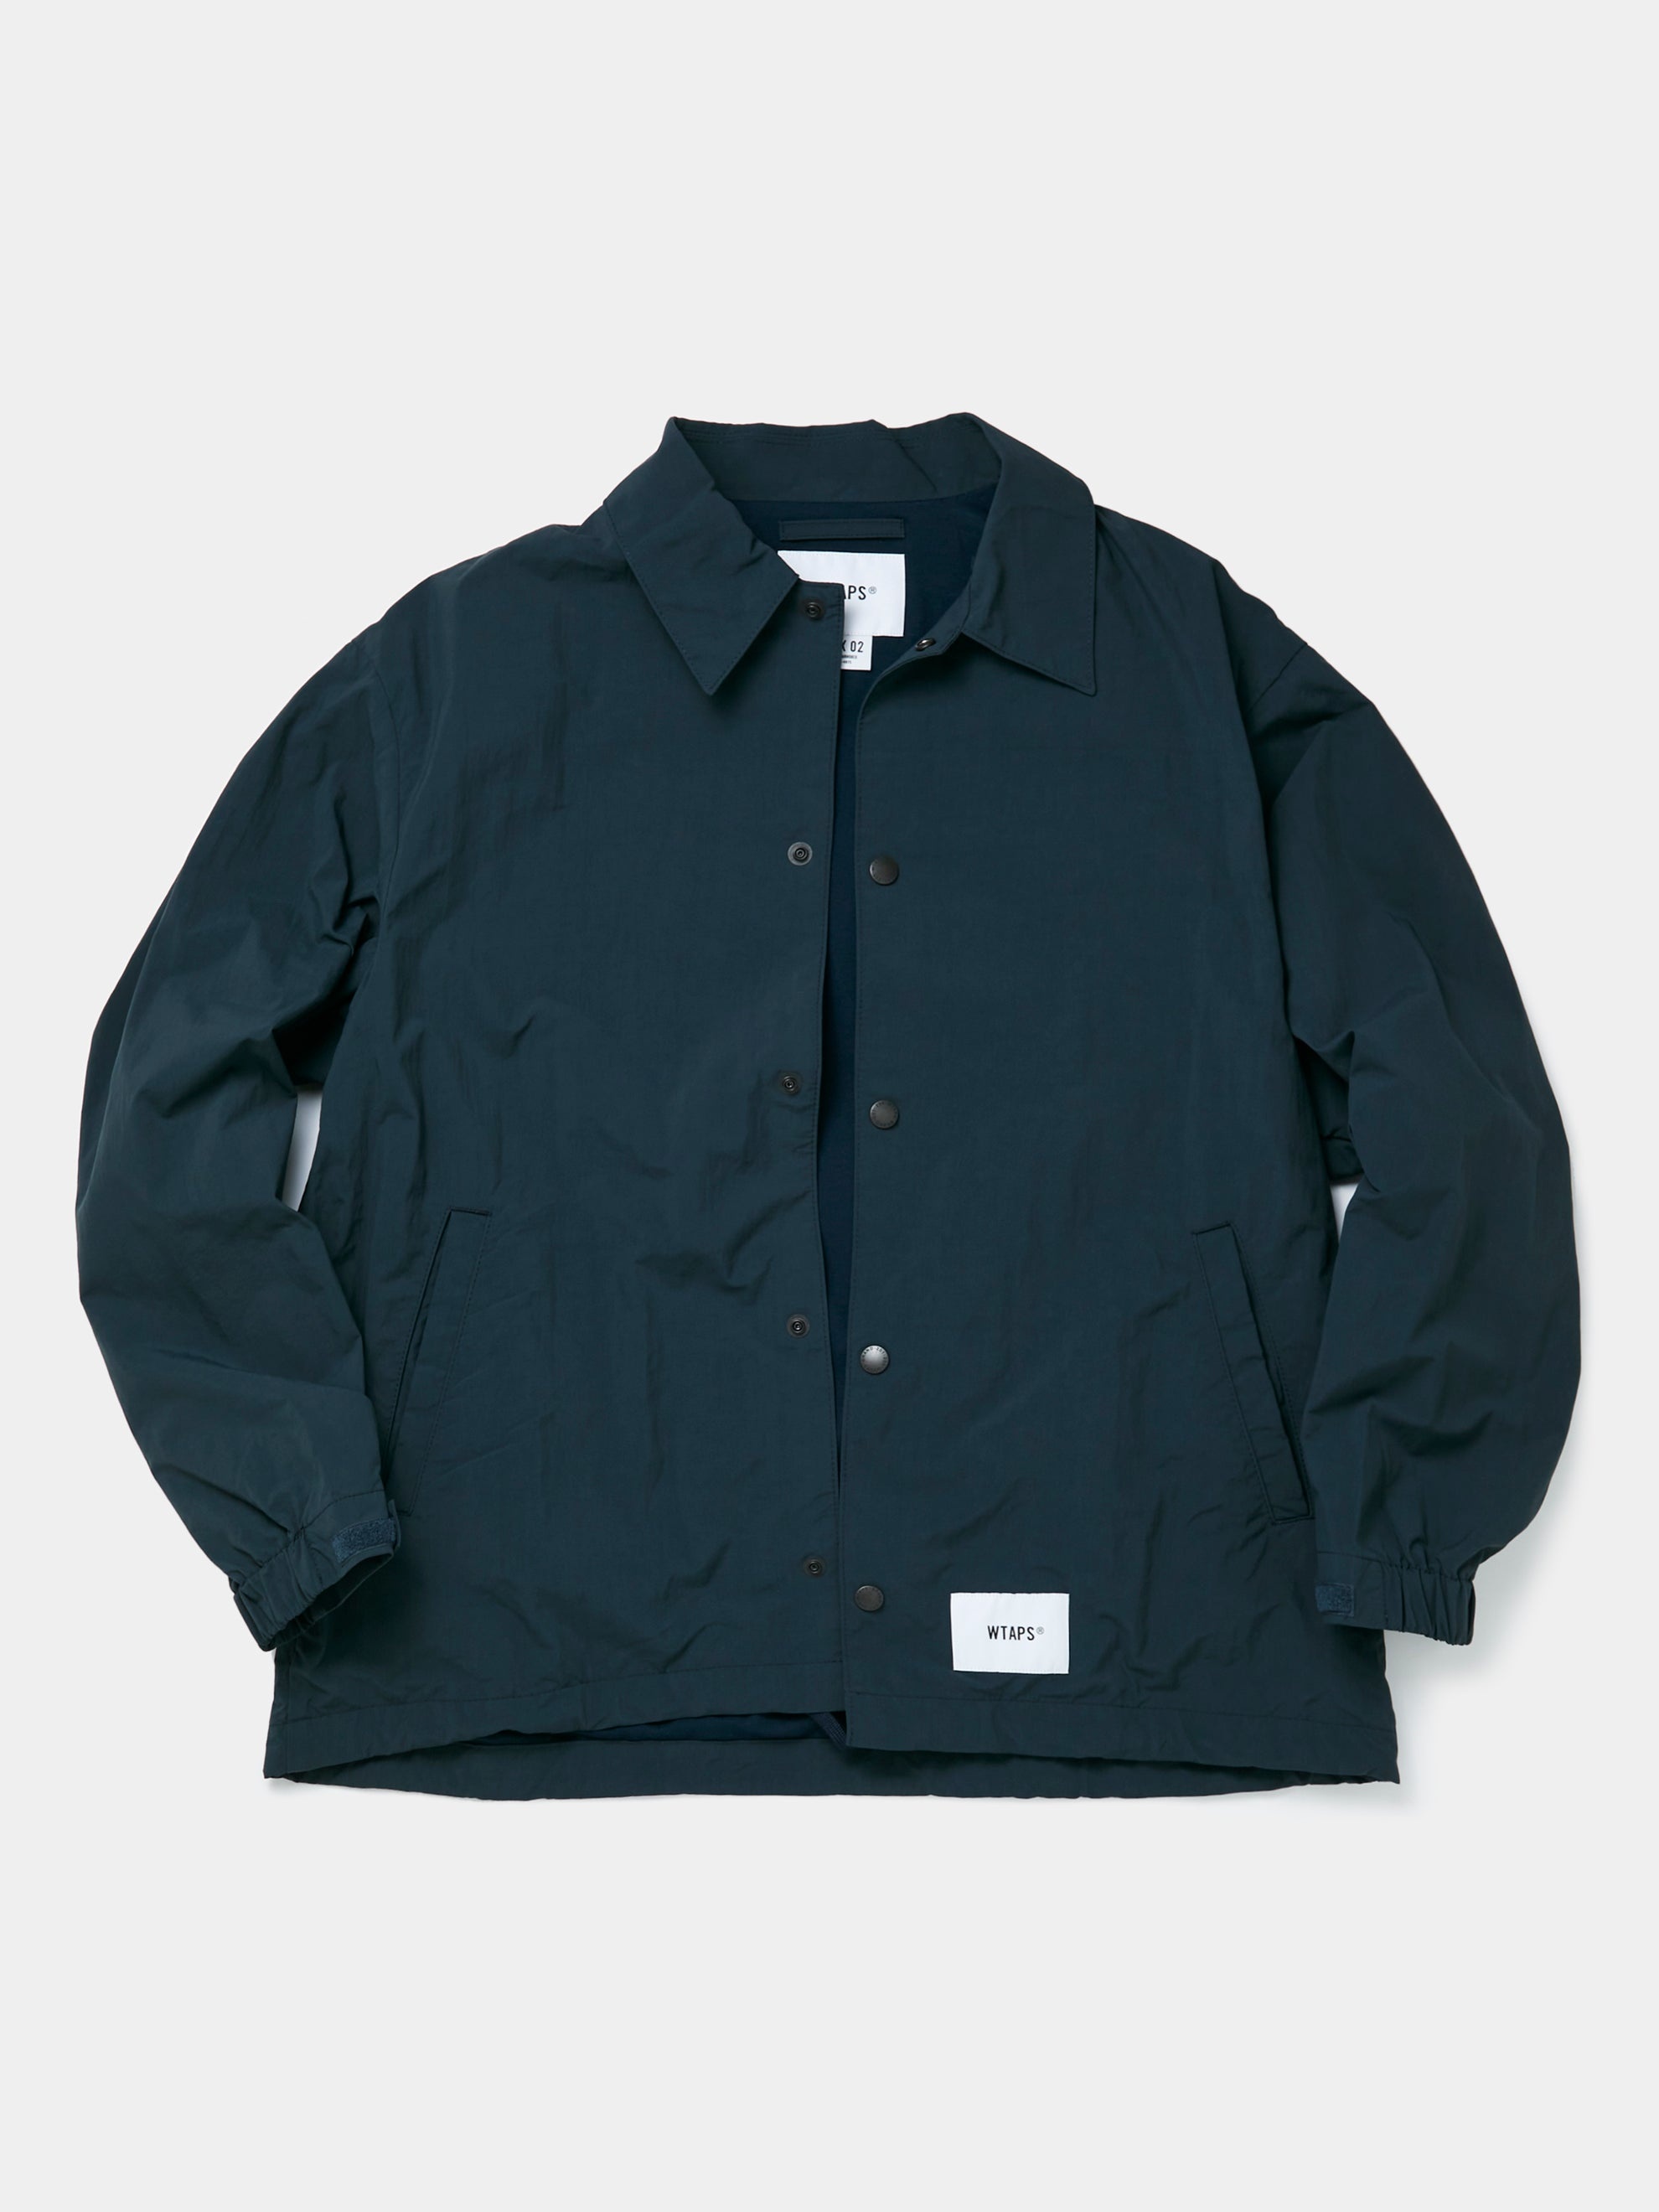 Wtaps Chief Jacket League  size M検討させて頂きます